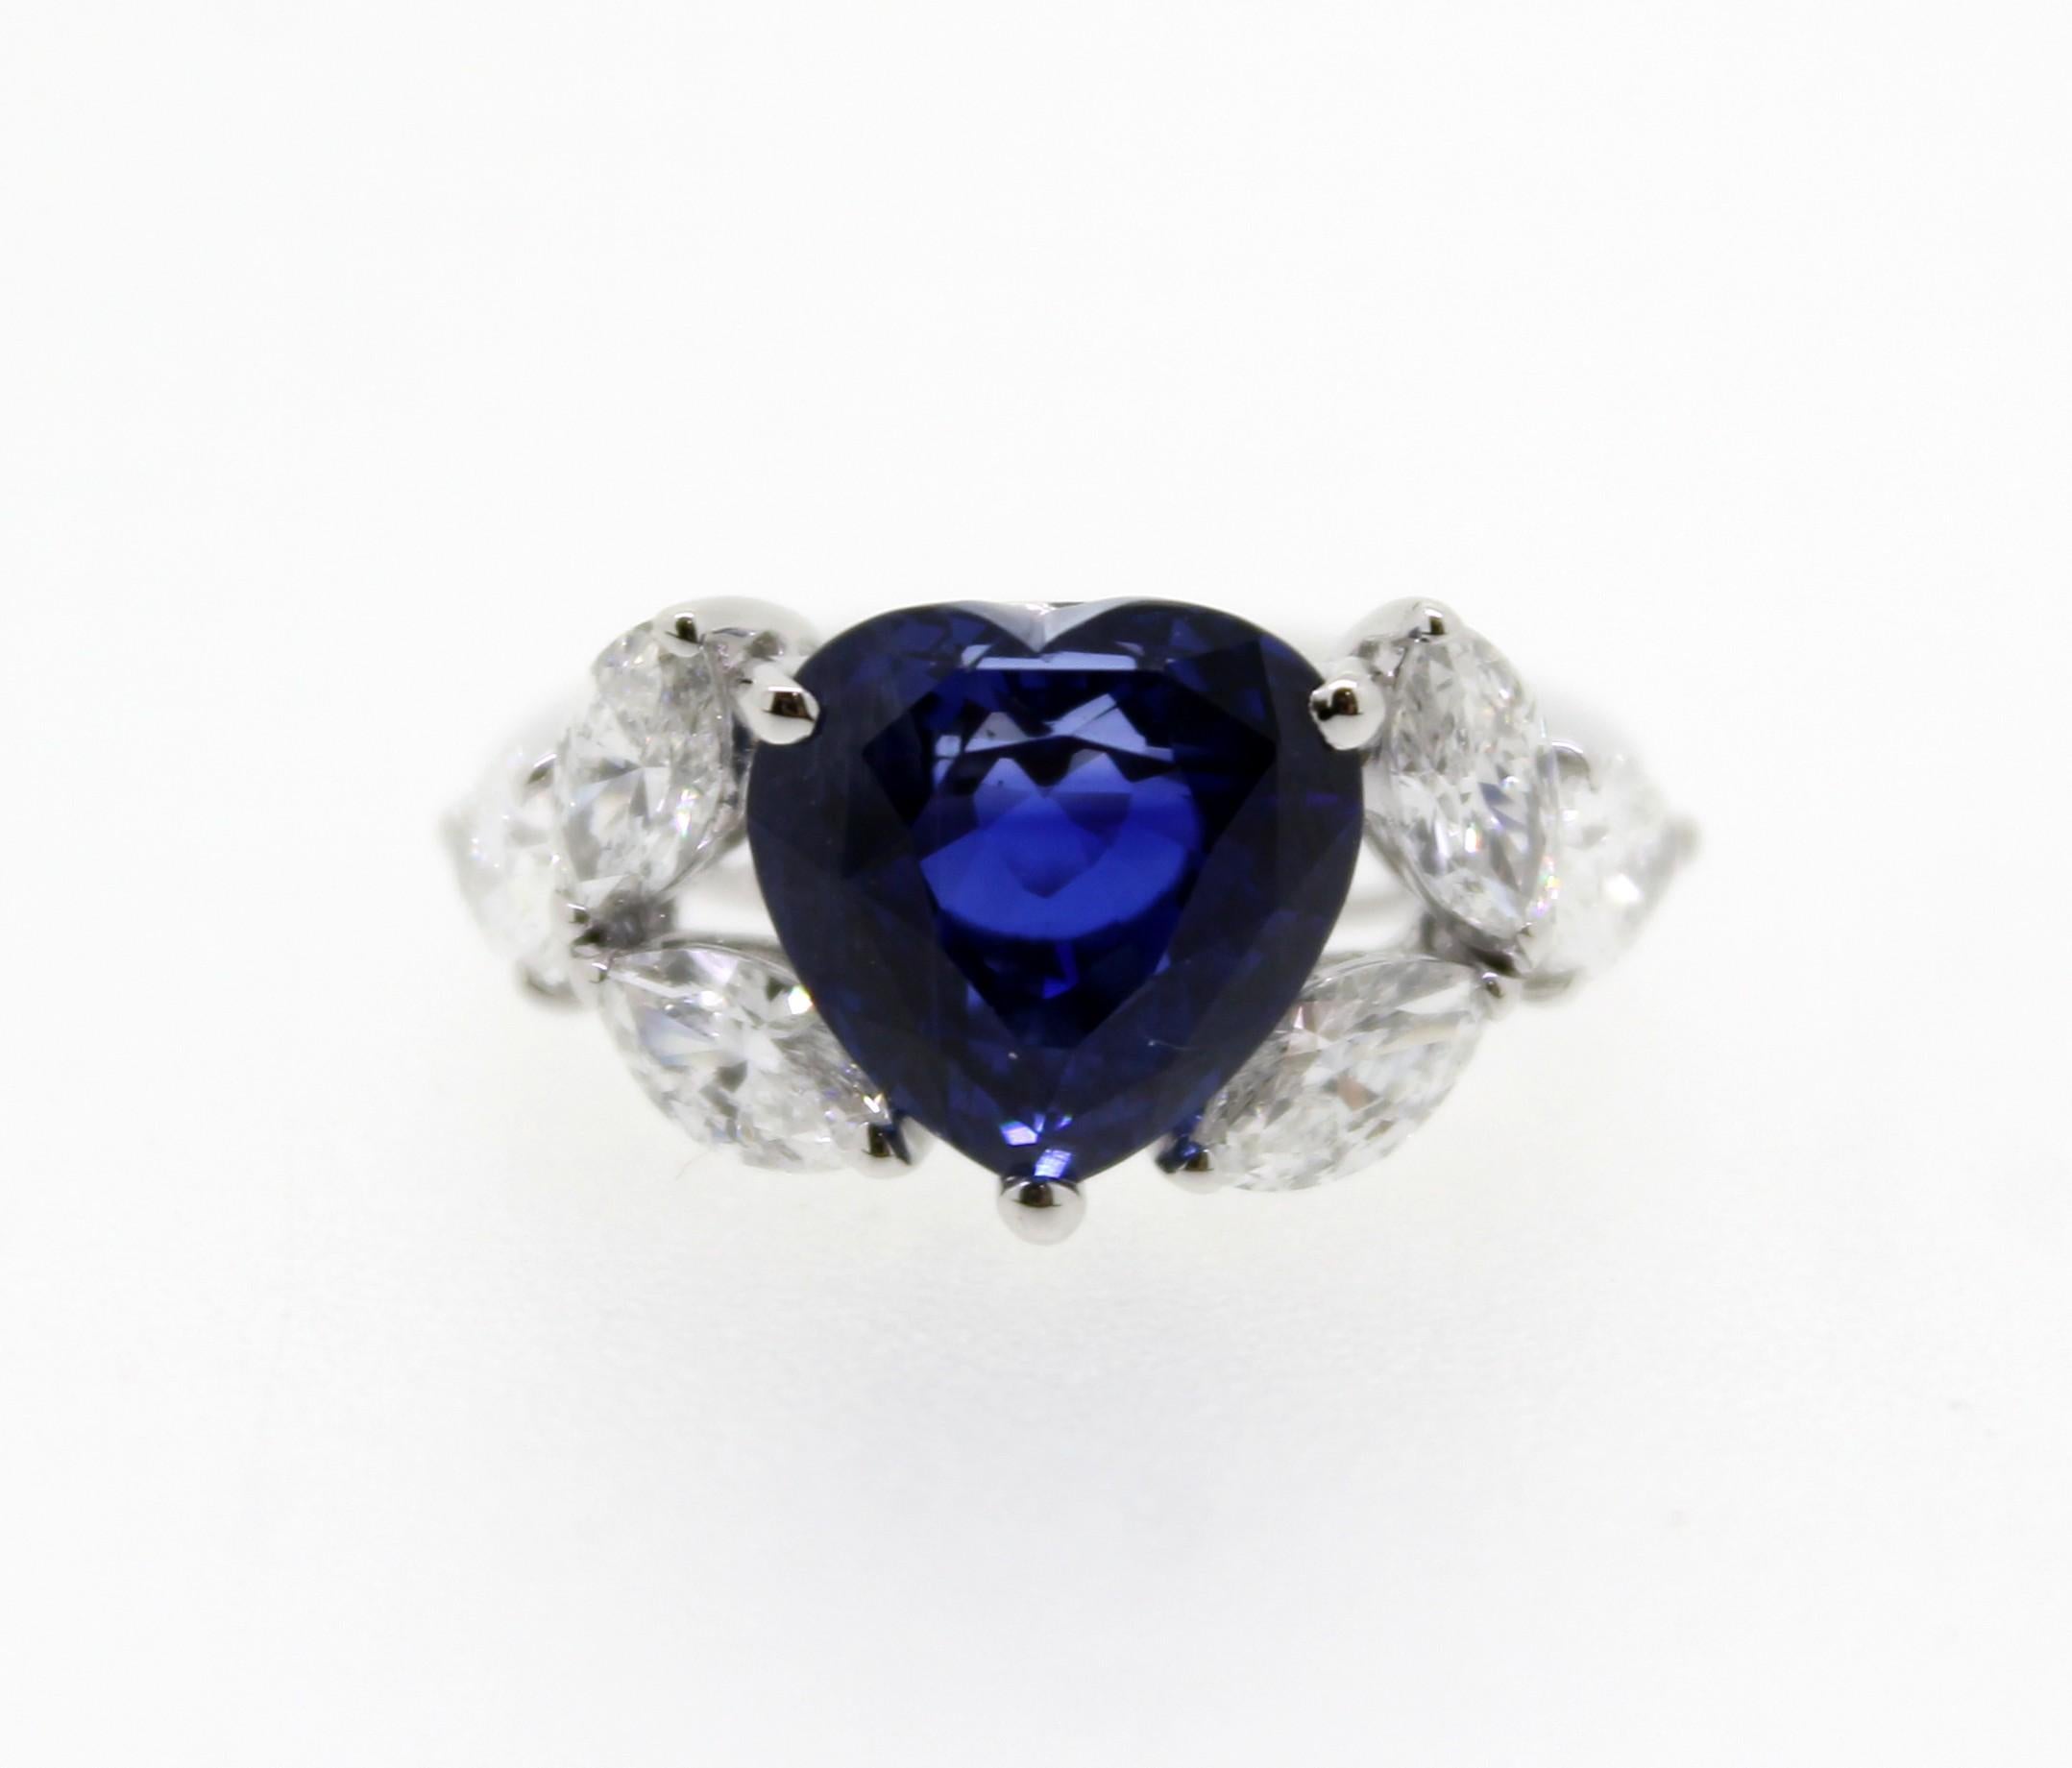 5.95 Carat Heart Shape Sapphire and White Marquise Diamond Cocktail Ring For Sale 1